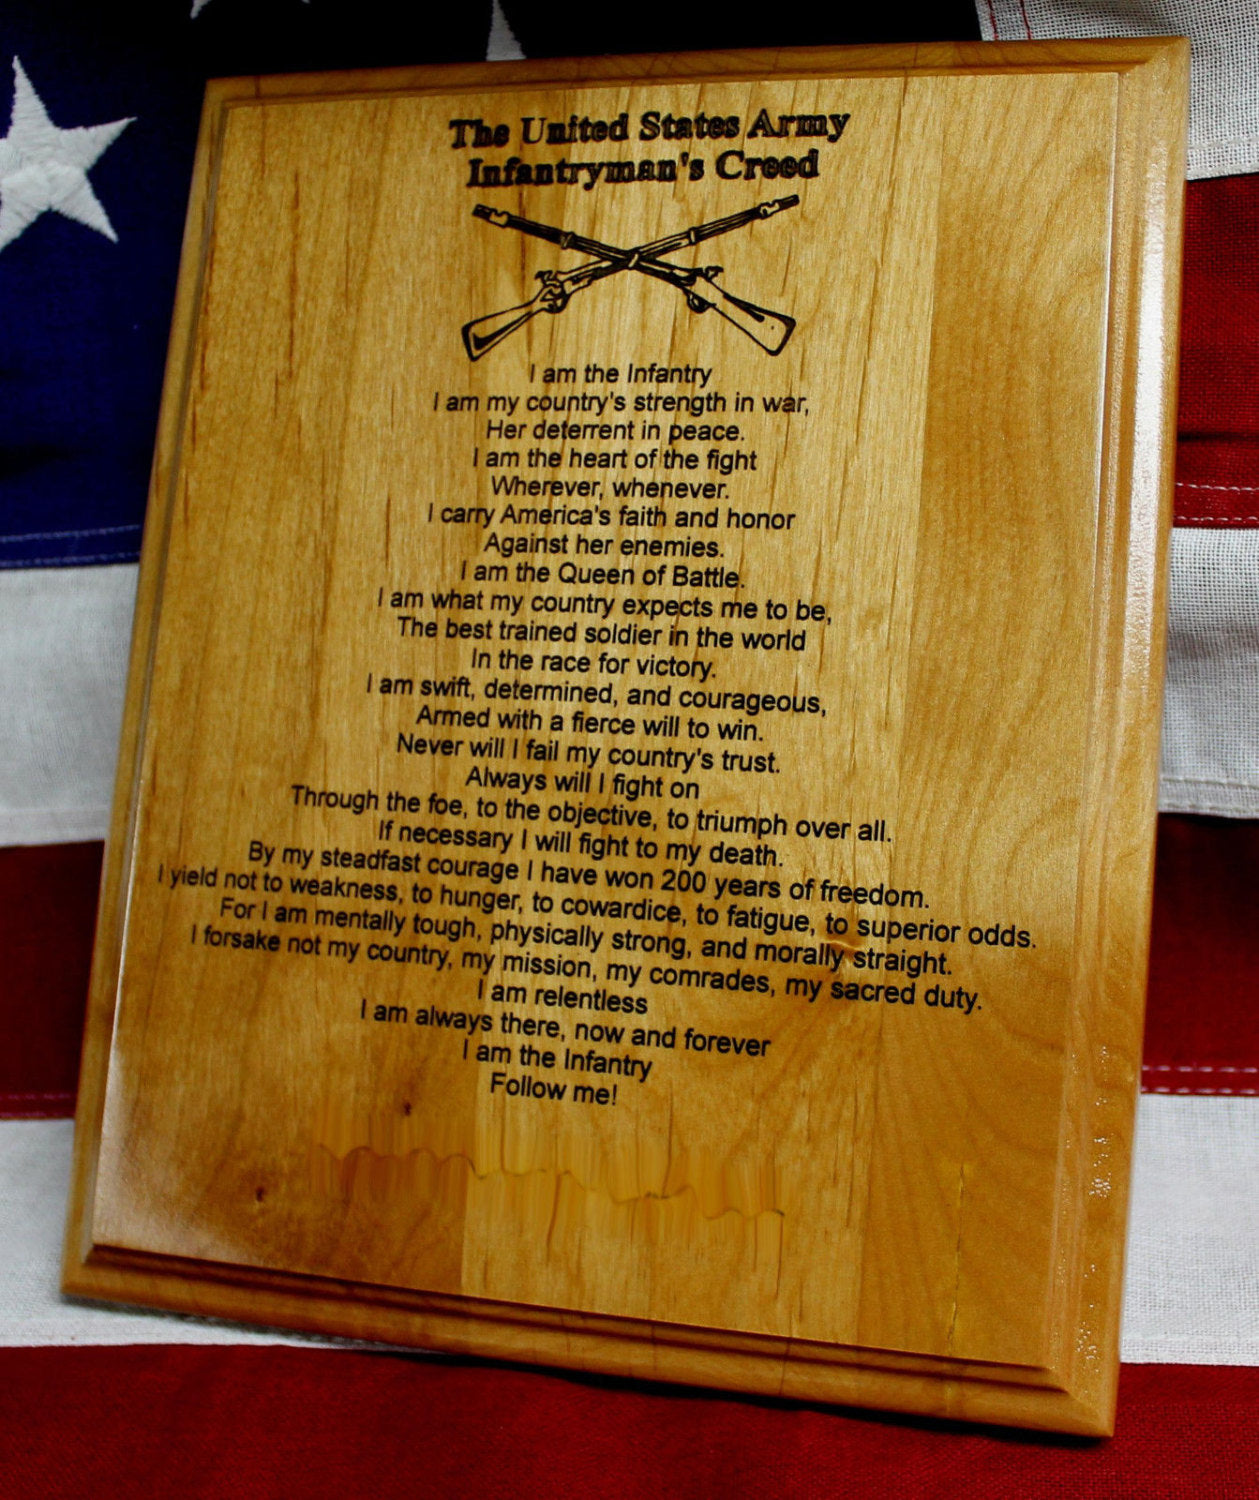 US ARMY Infantryman's Creed Plaque, infantry crossed rifles